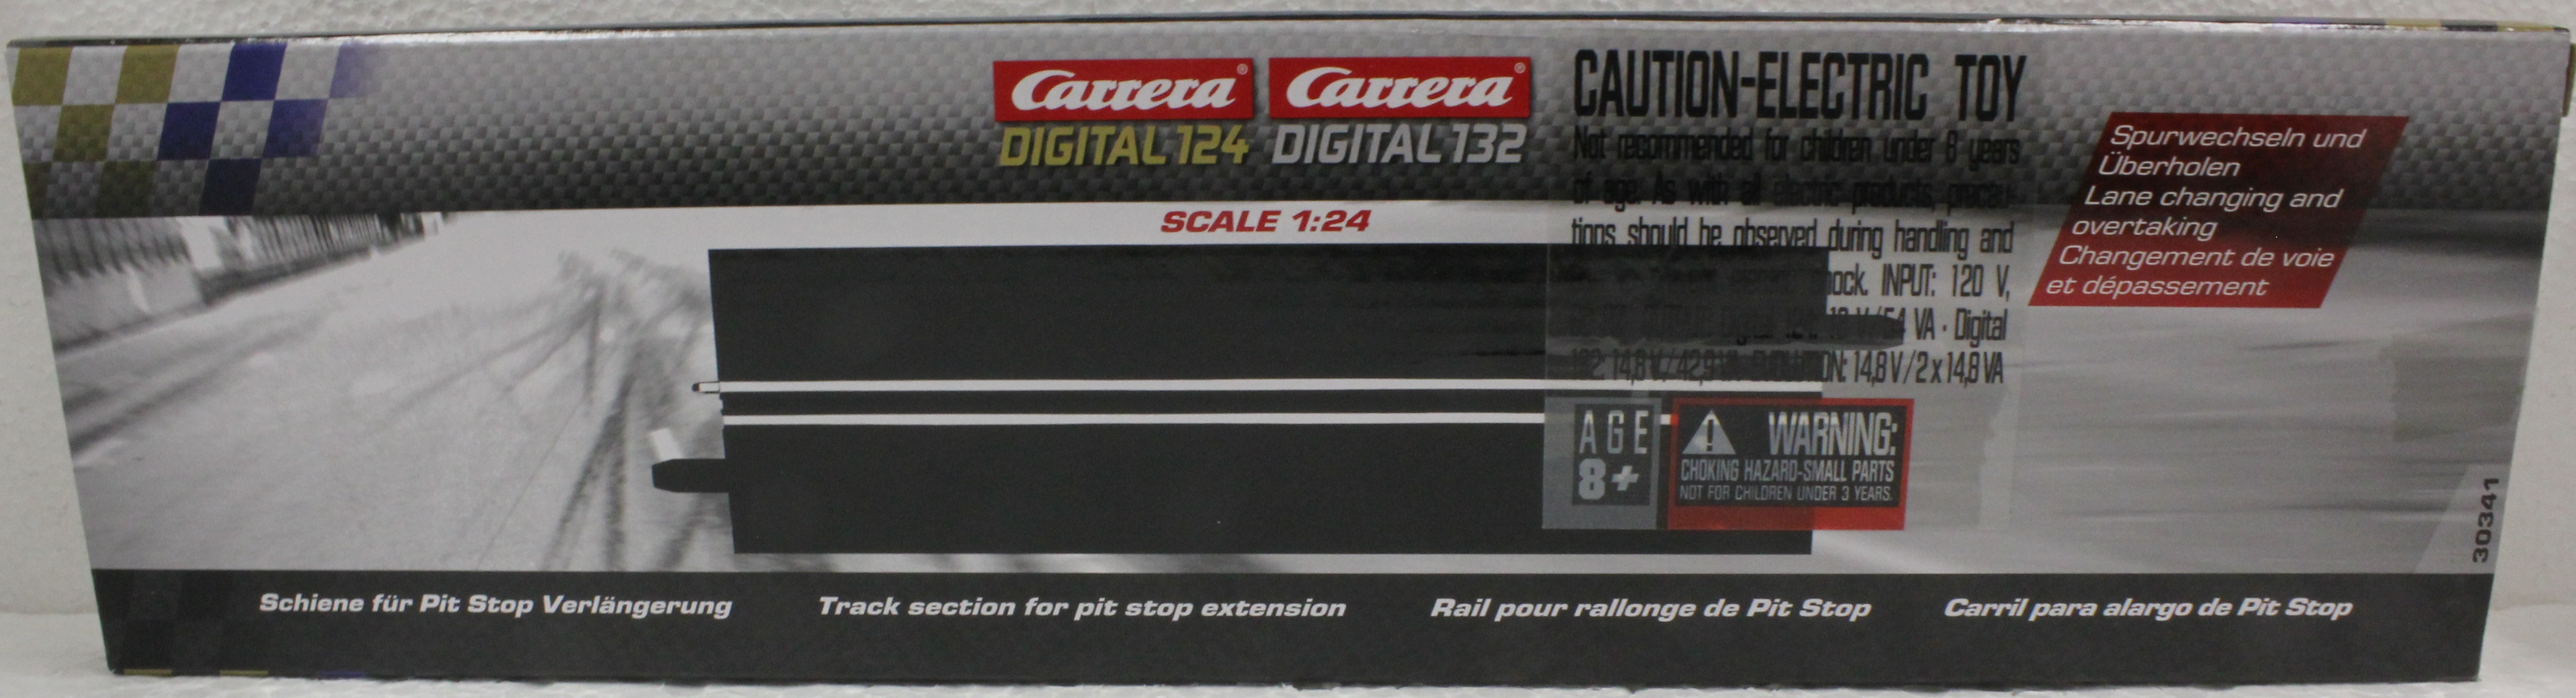 30341 Carrera Digital 124/132 Pit Stop Lane Extension 1:24 Slot Car Track -  Great Traditions